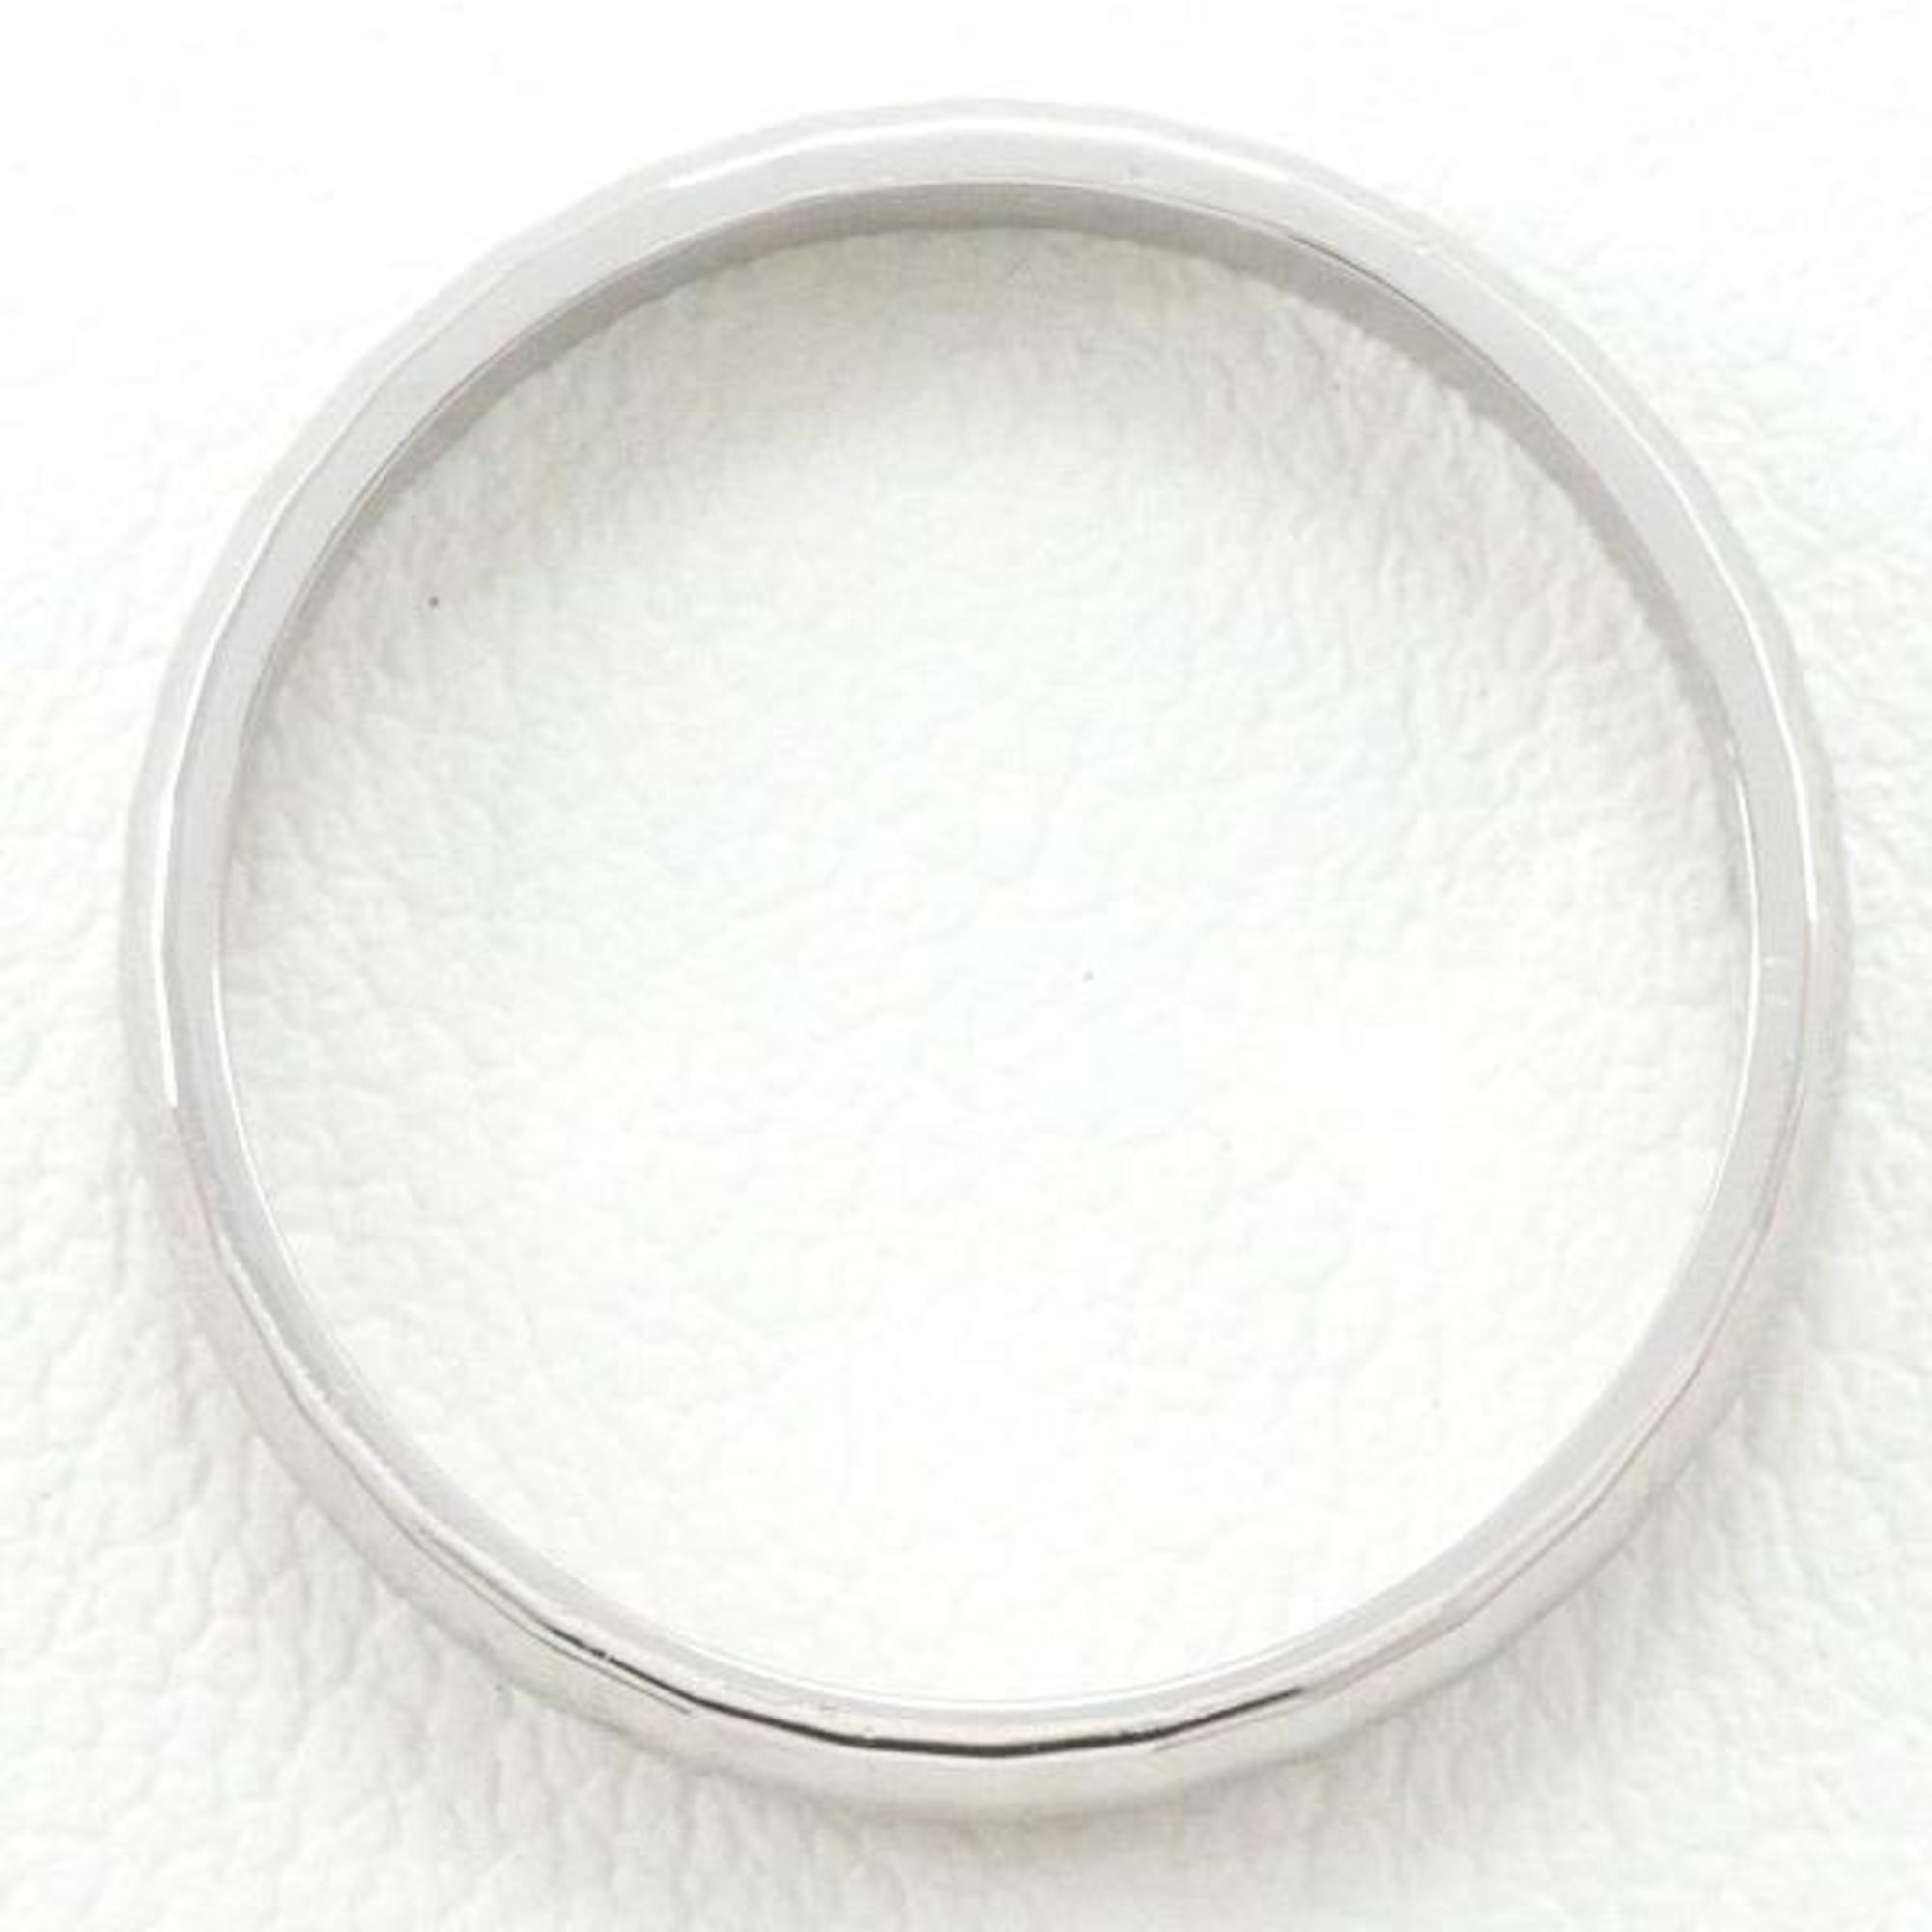 Seiko Jewelry PT900 Ring No. 8 Total Weight Approx. 2.8g